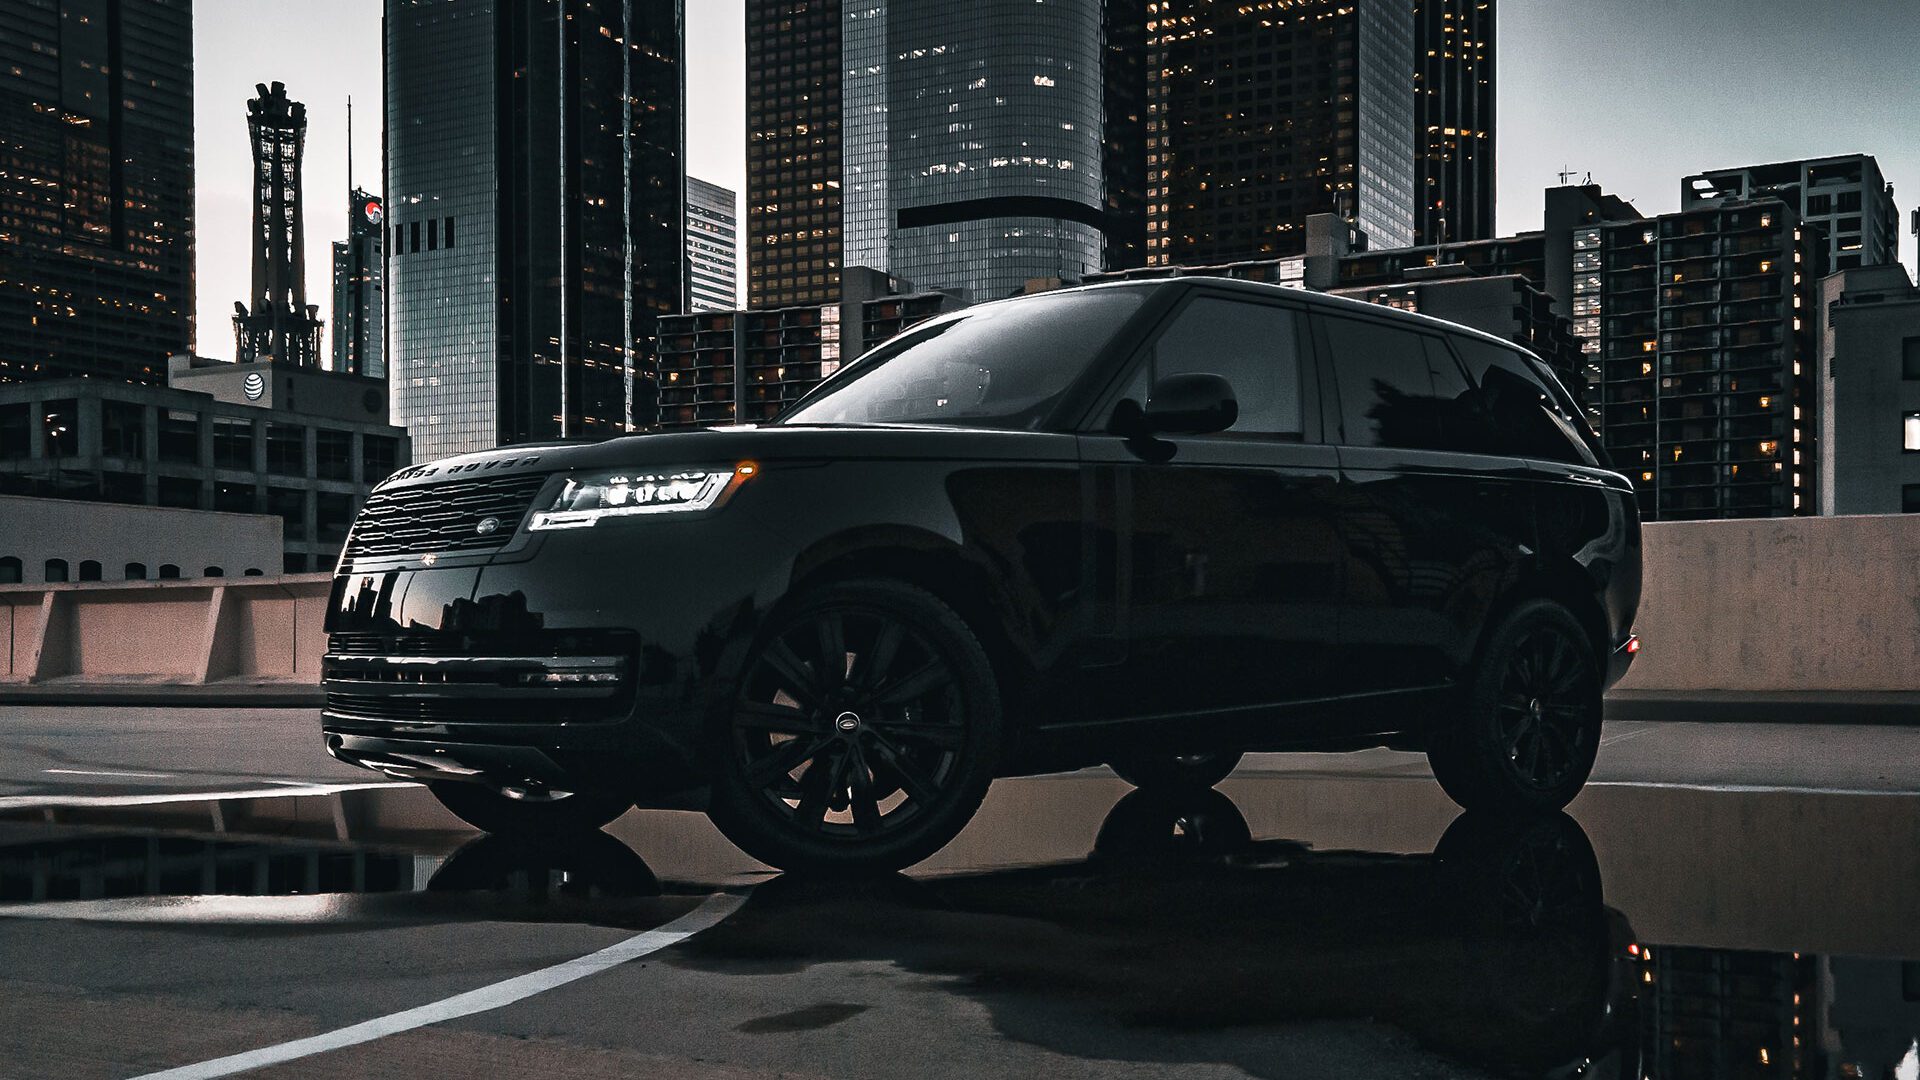 Renting a Range Rover? Here Are 5 Reasons Why You Should | Blog